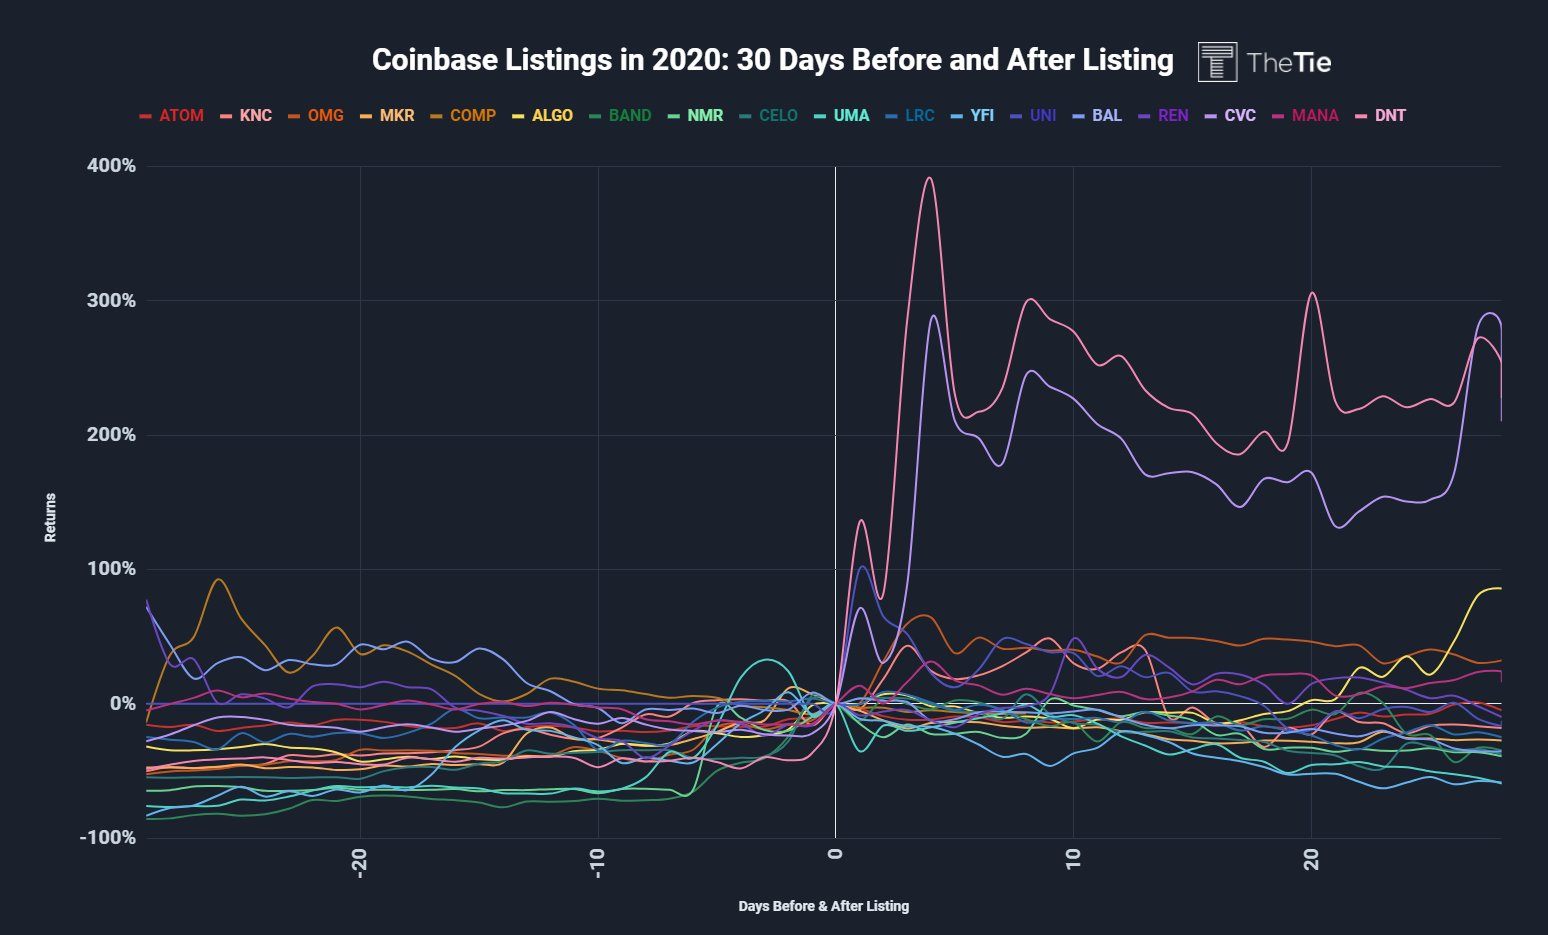 Coinbase listings in 2020